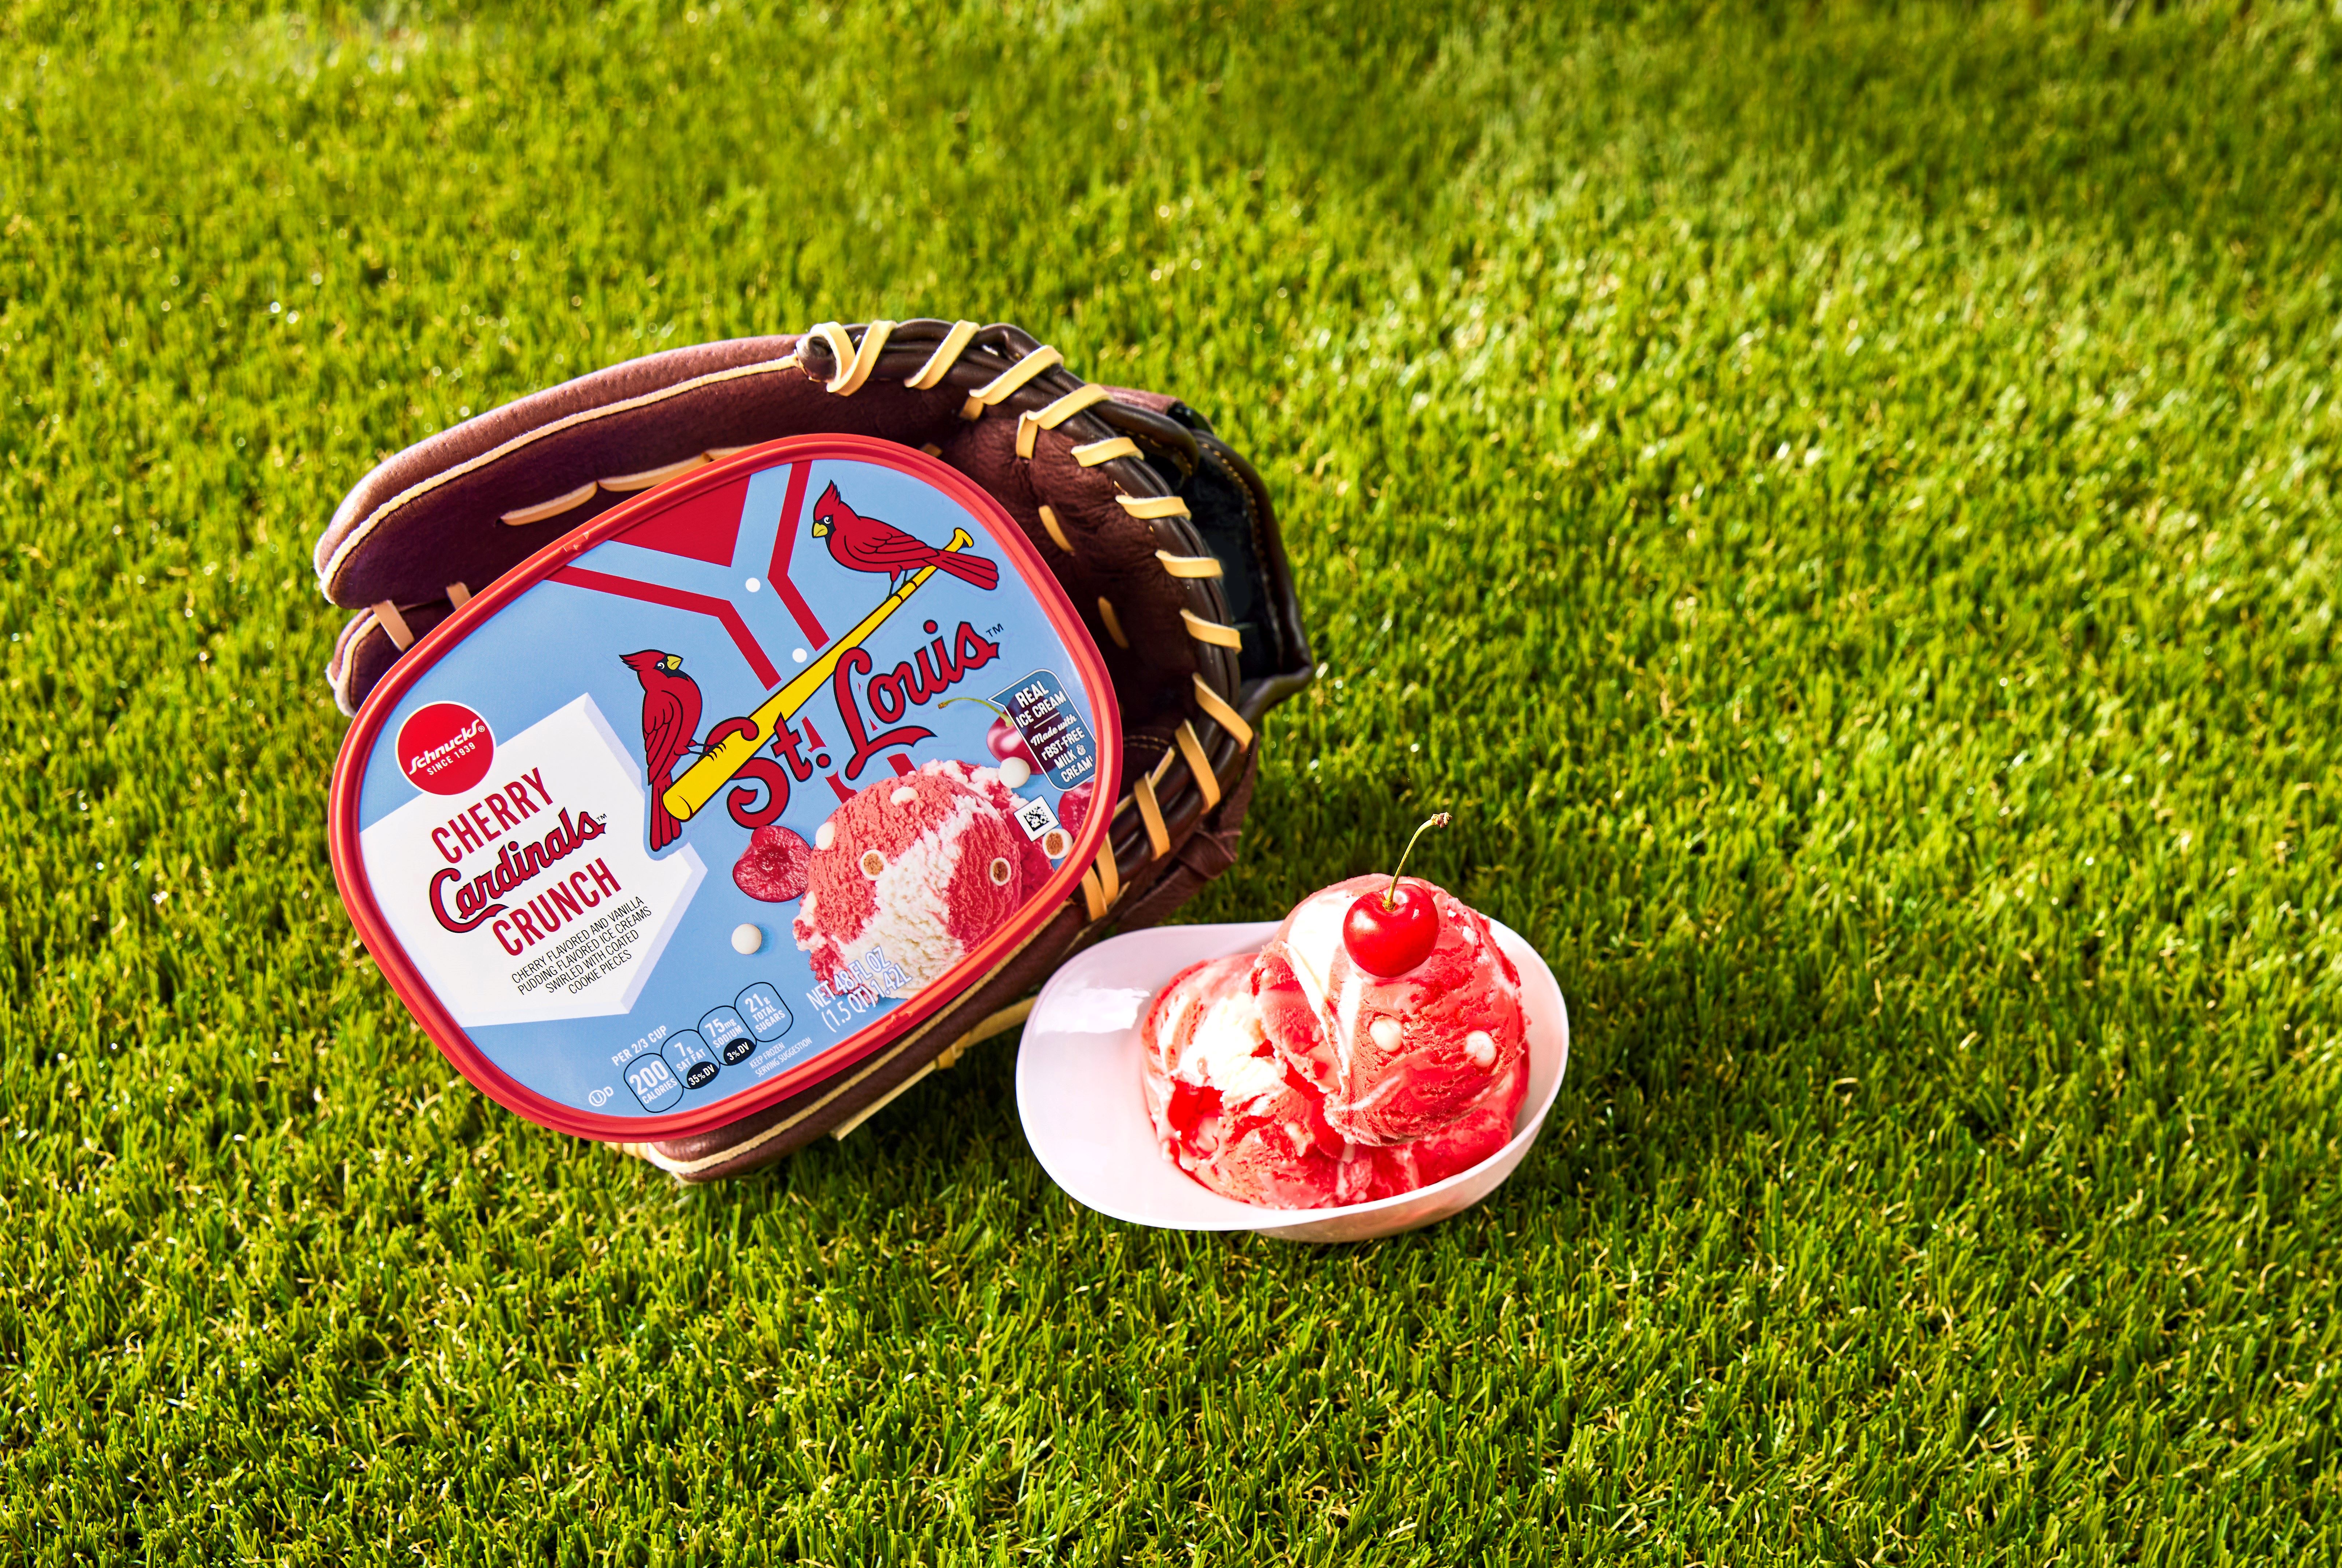 Cardinals team up with Schnucks to introduce new ice cream